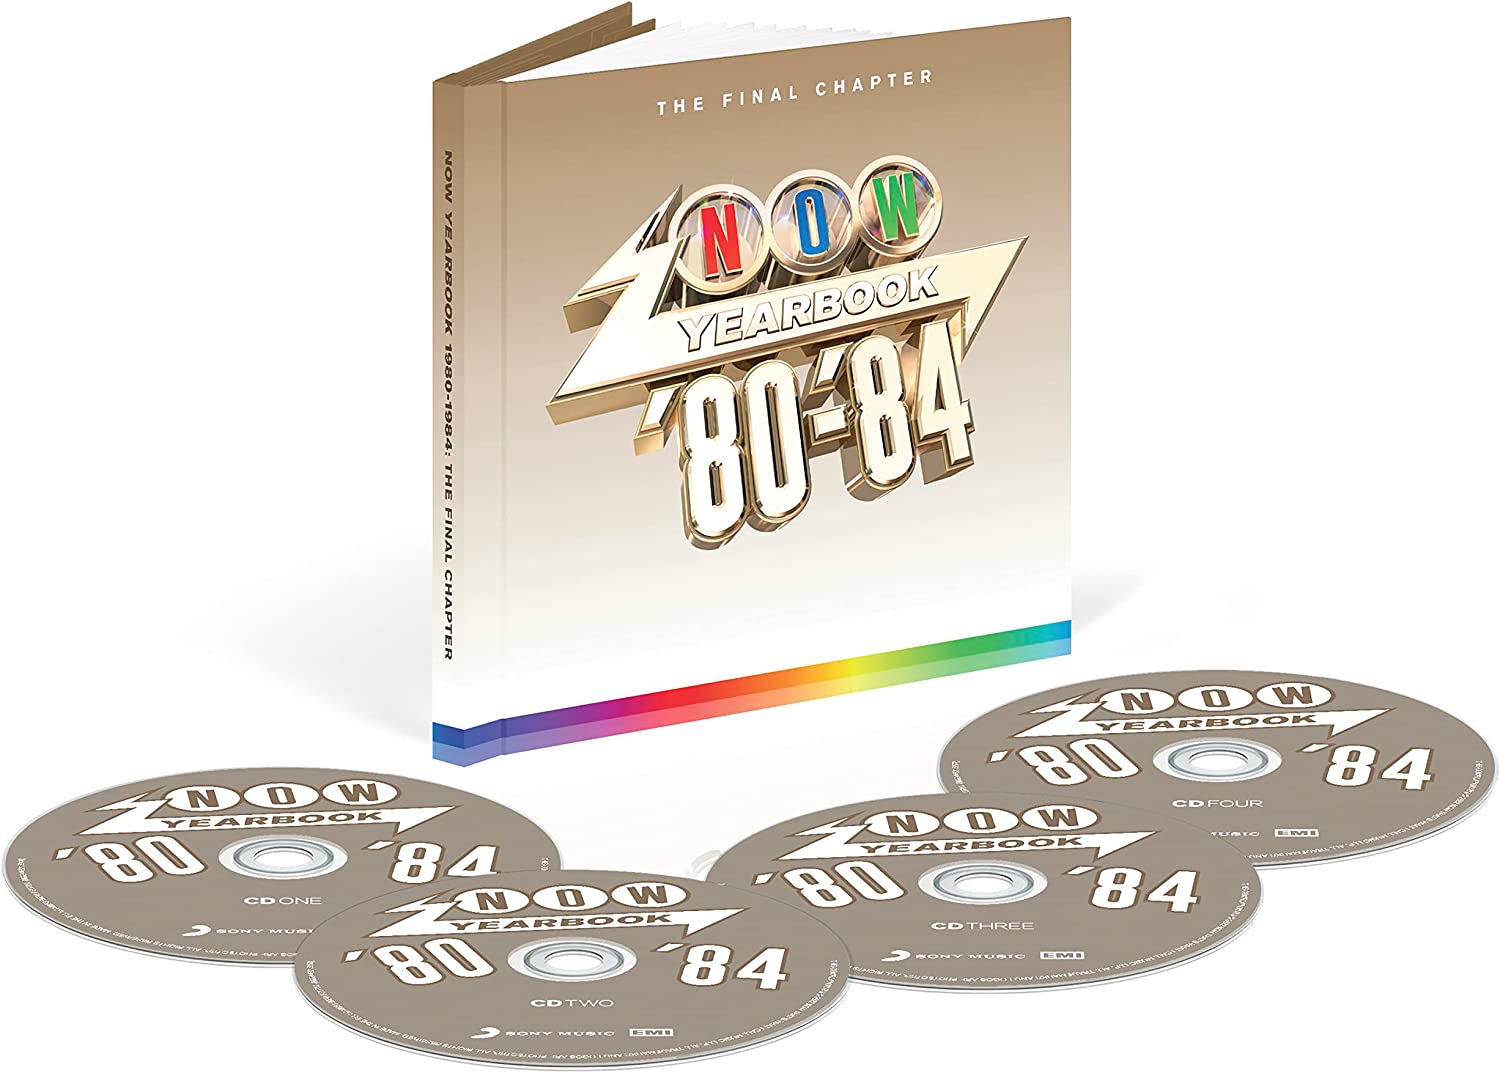 Fan Des Annees 80 - Compilation - SONY MUSIC CATALOGUE - CD